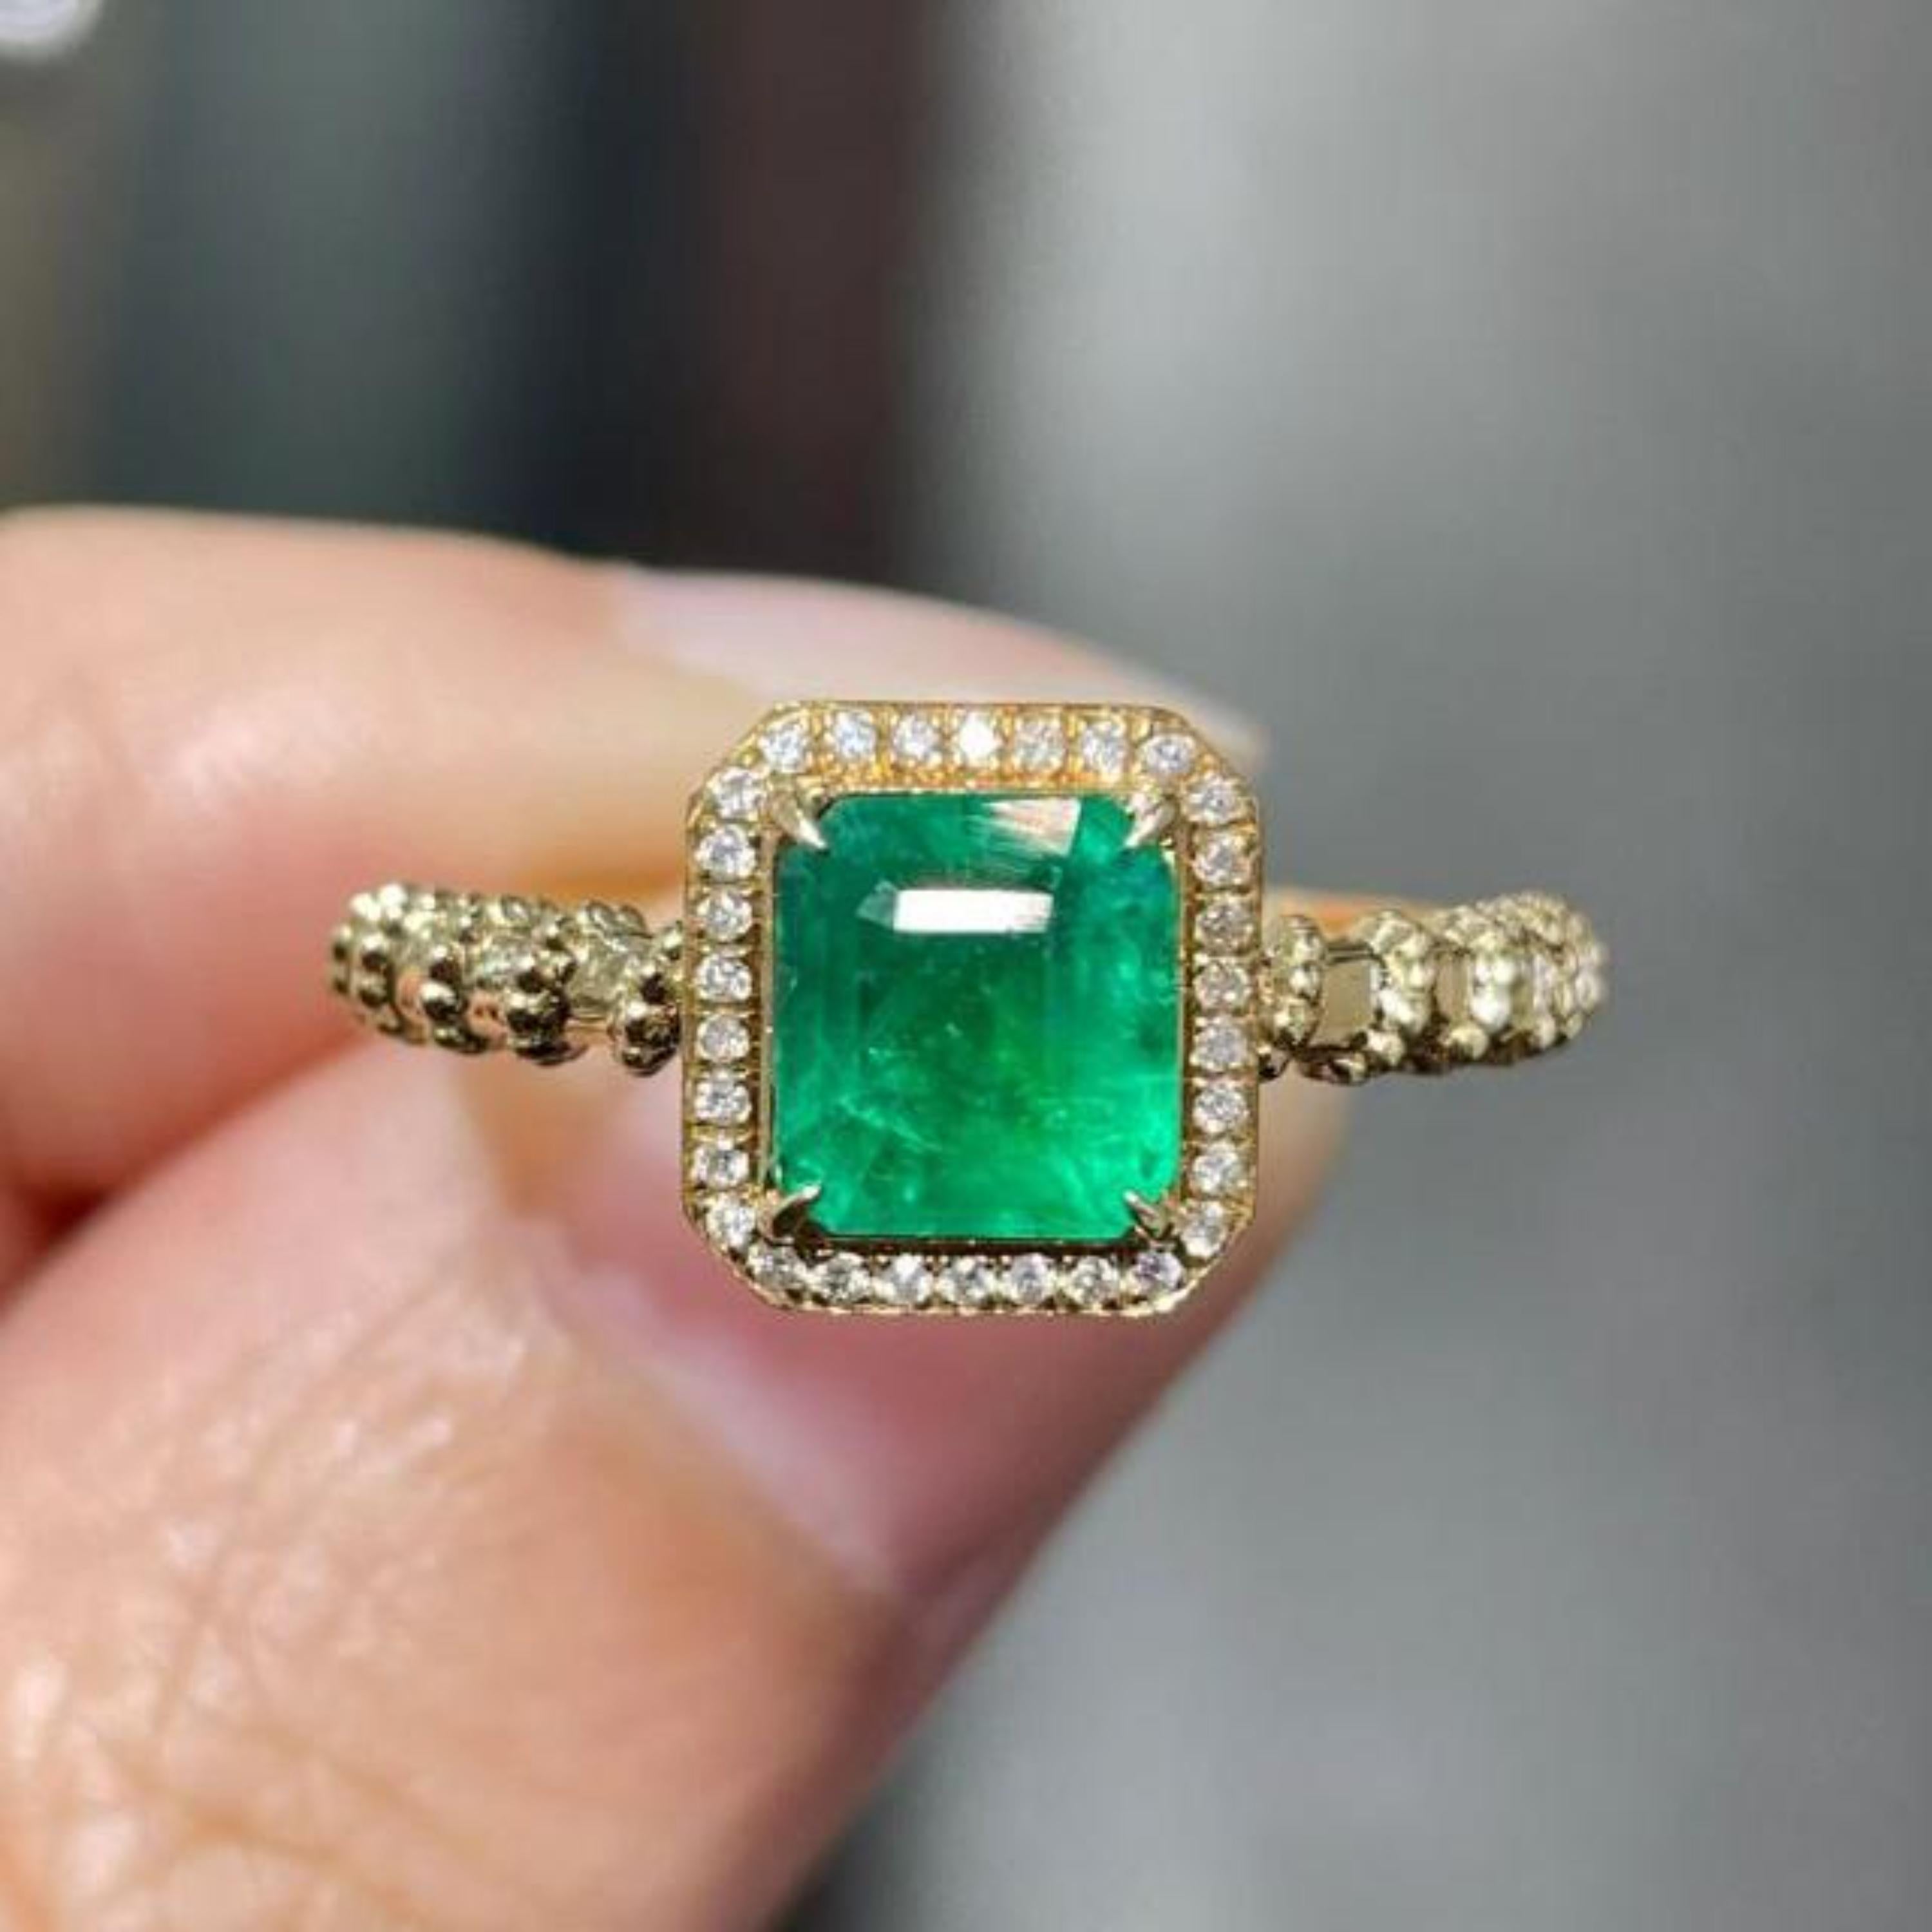 Antique Certified Natural Emerald Diamond Engagement Ring in 18K Gold, Band Ring

A stunning ring featuring IGI/GIA Certified 1.02 Carat Natural Emerald and 0.18 Carat of Diamond Accents set in 18K Solid Gold.

Emeralds are highly valued for their